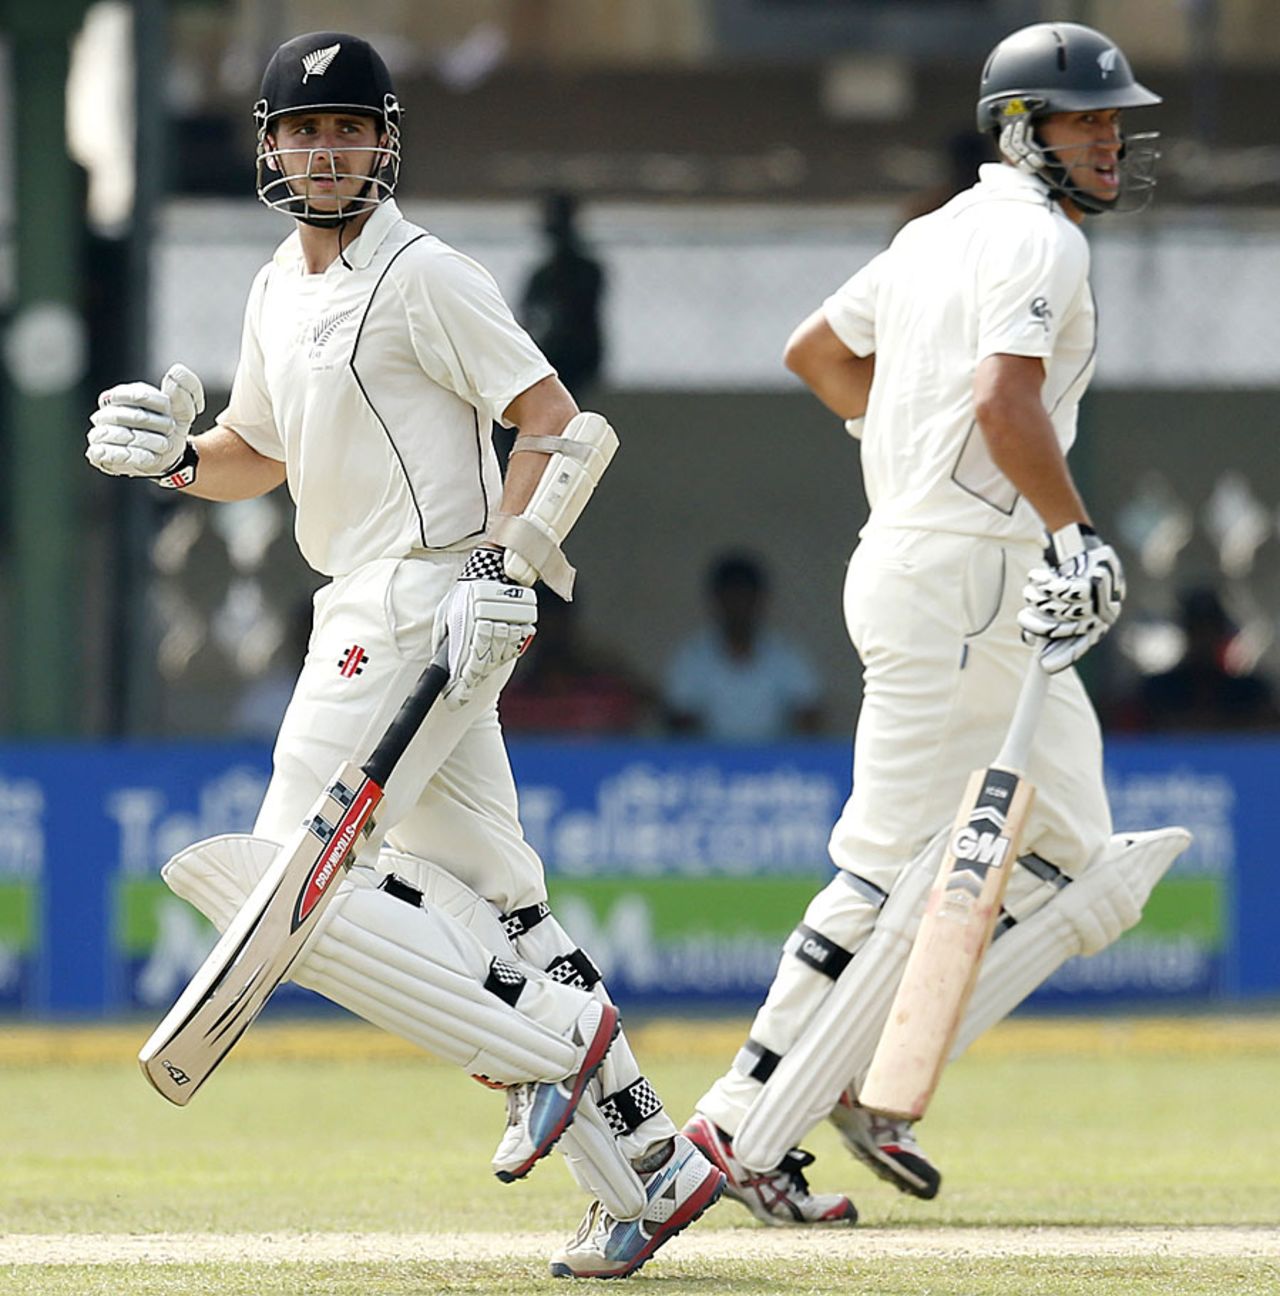 Ross Taylor and Kane Williamson take a run during their stand, Sri Lanka v New Zealand, 2nd Test, Colombo, 1st day, November 25, 2012